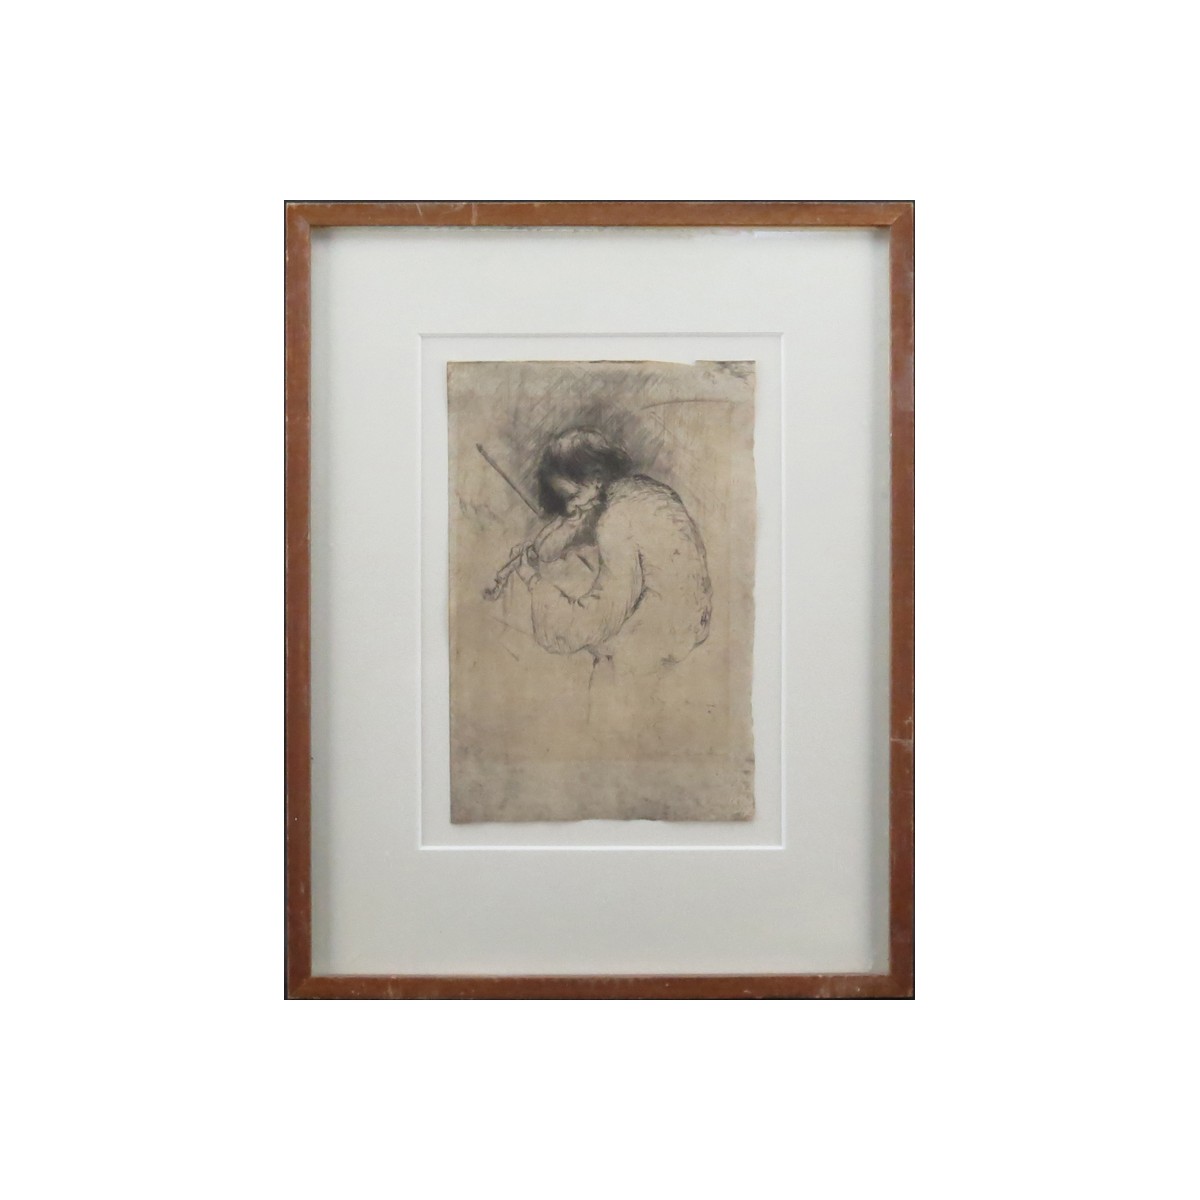 Hilton Leech, American (1906-1969) Abstract Etching "Old Violinist" Pencil 